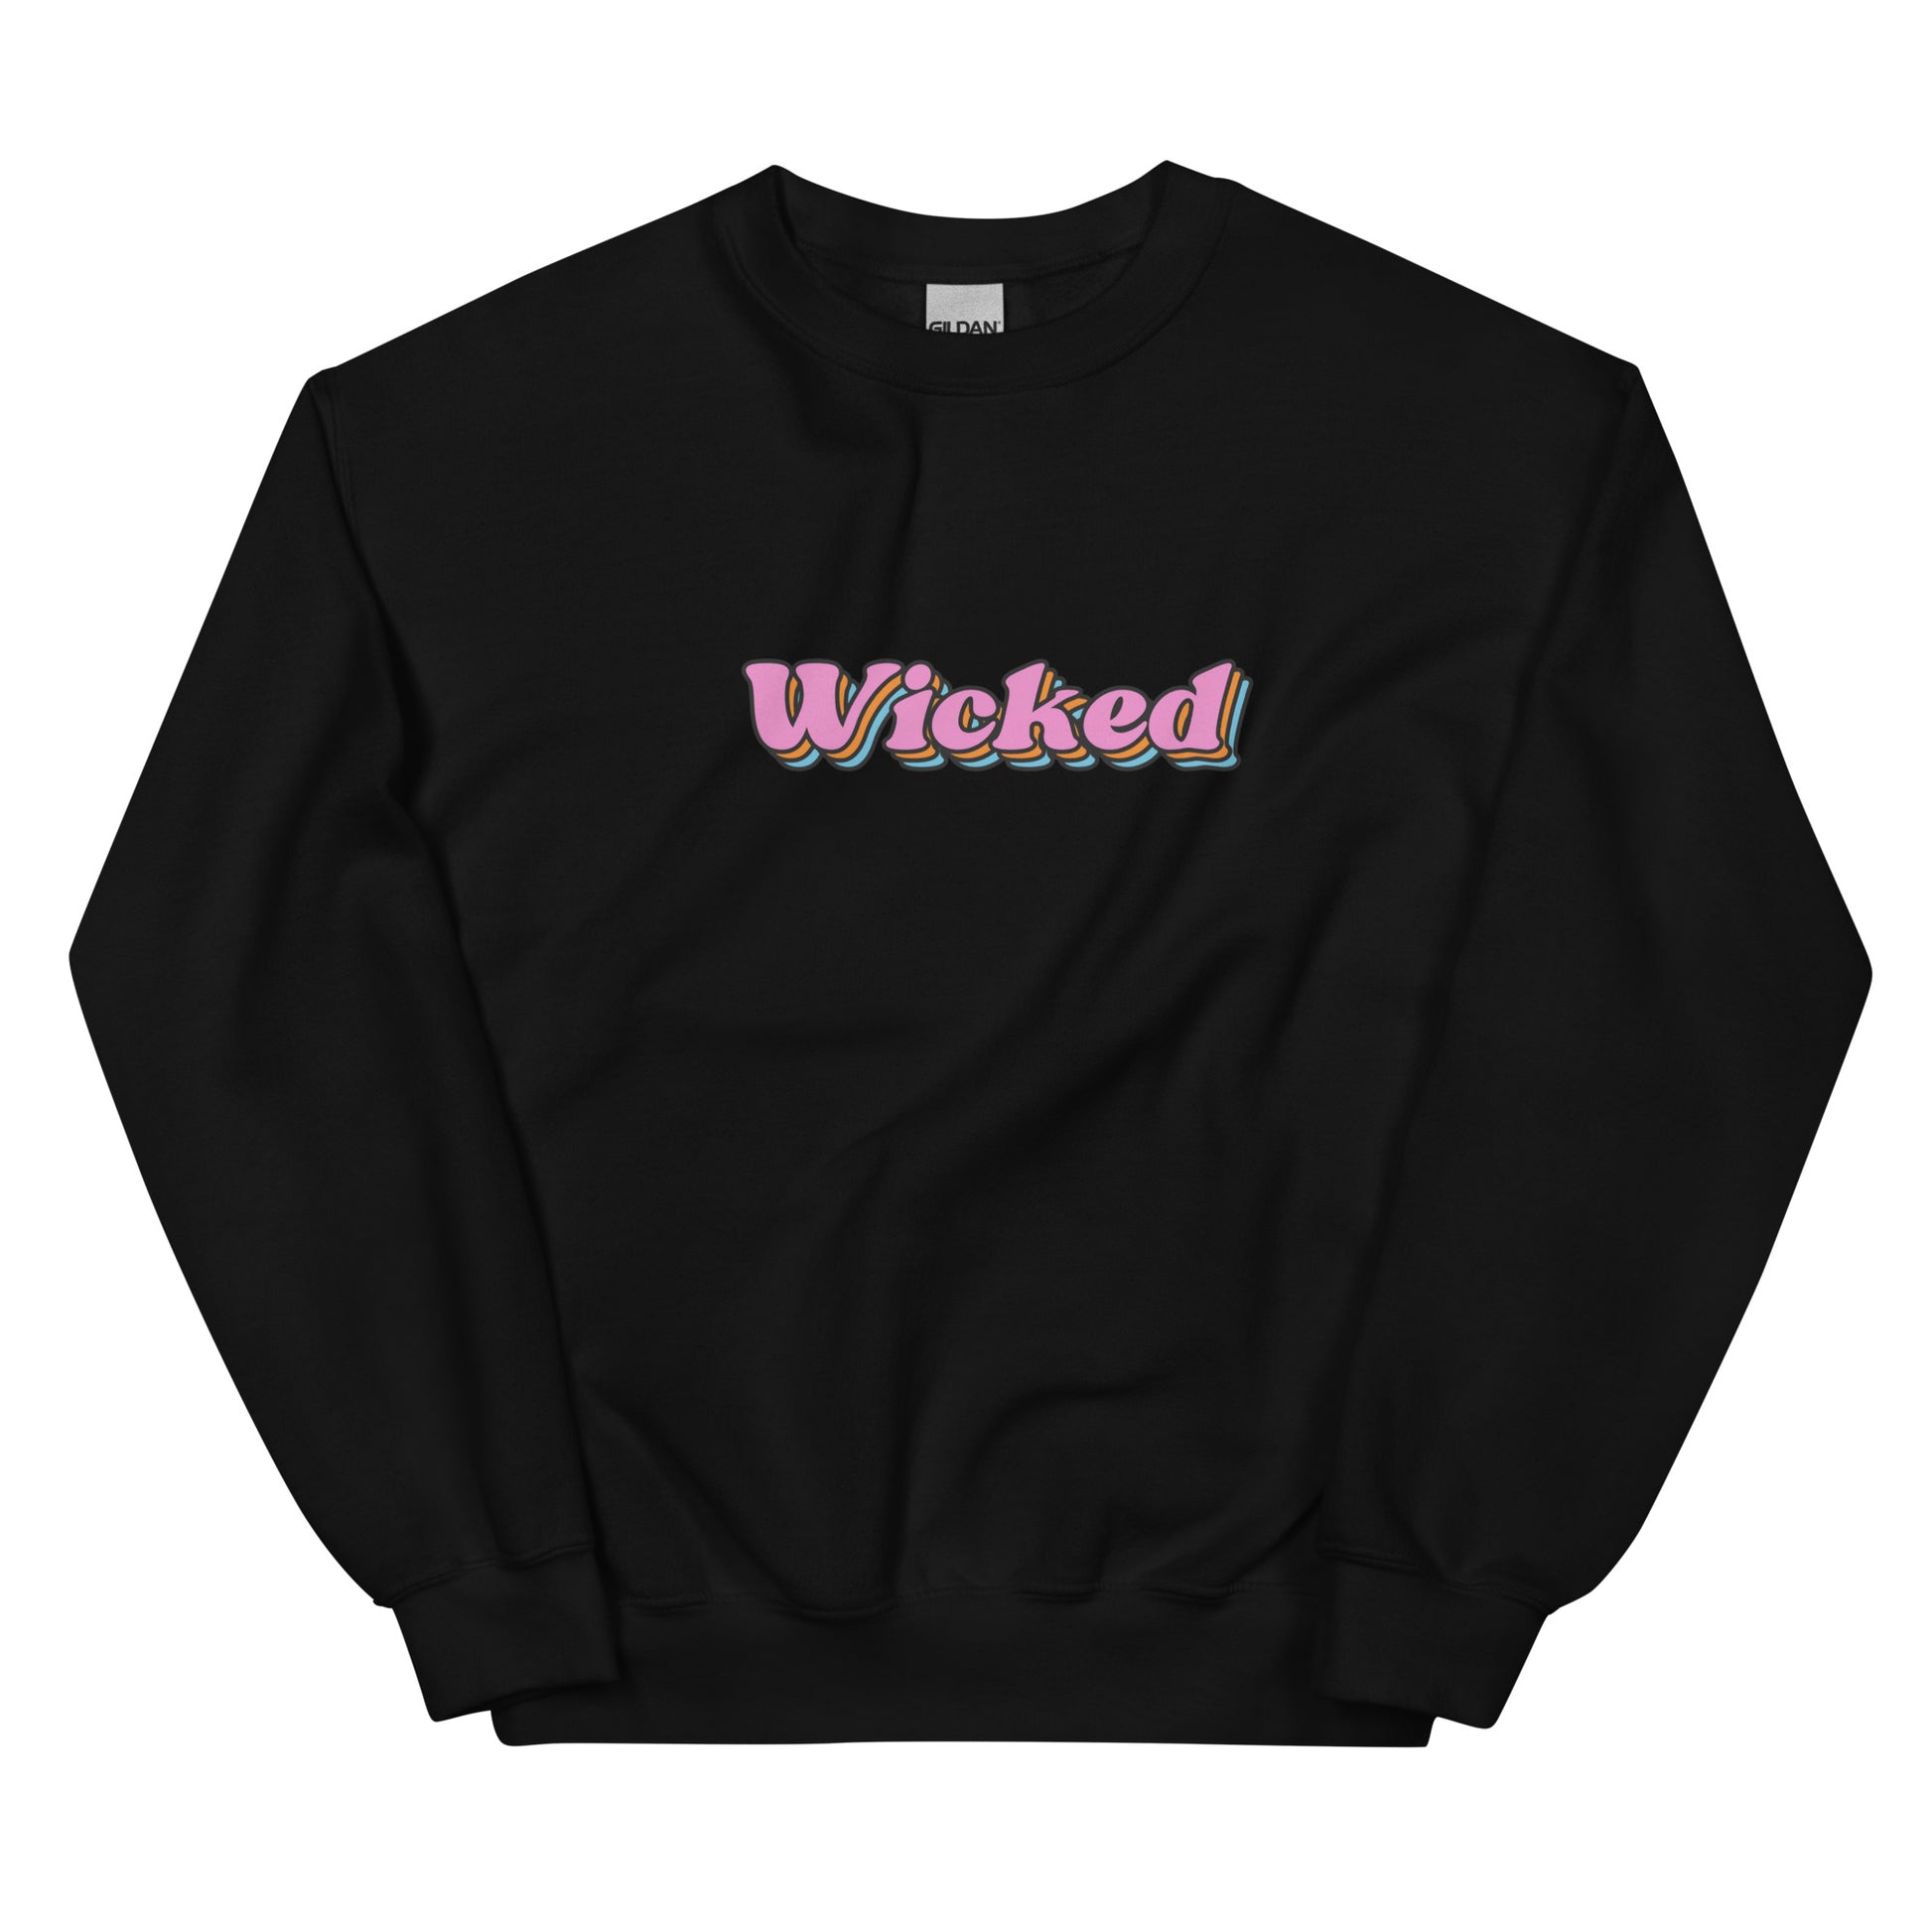 black crewneck that says "wicked" in pink lettering